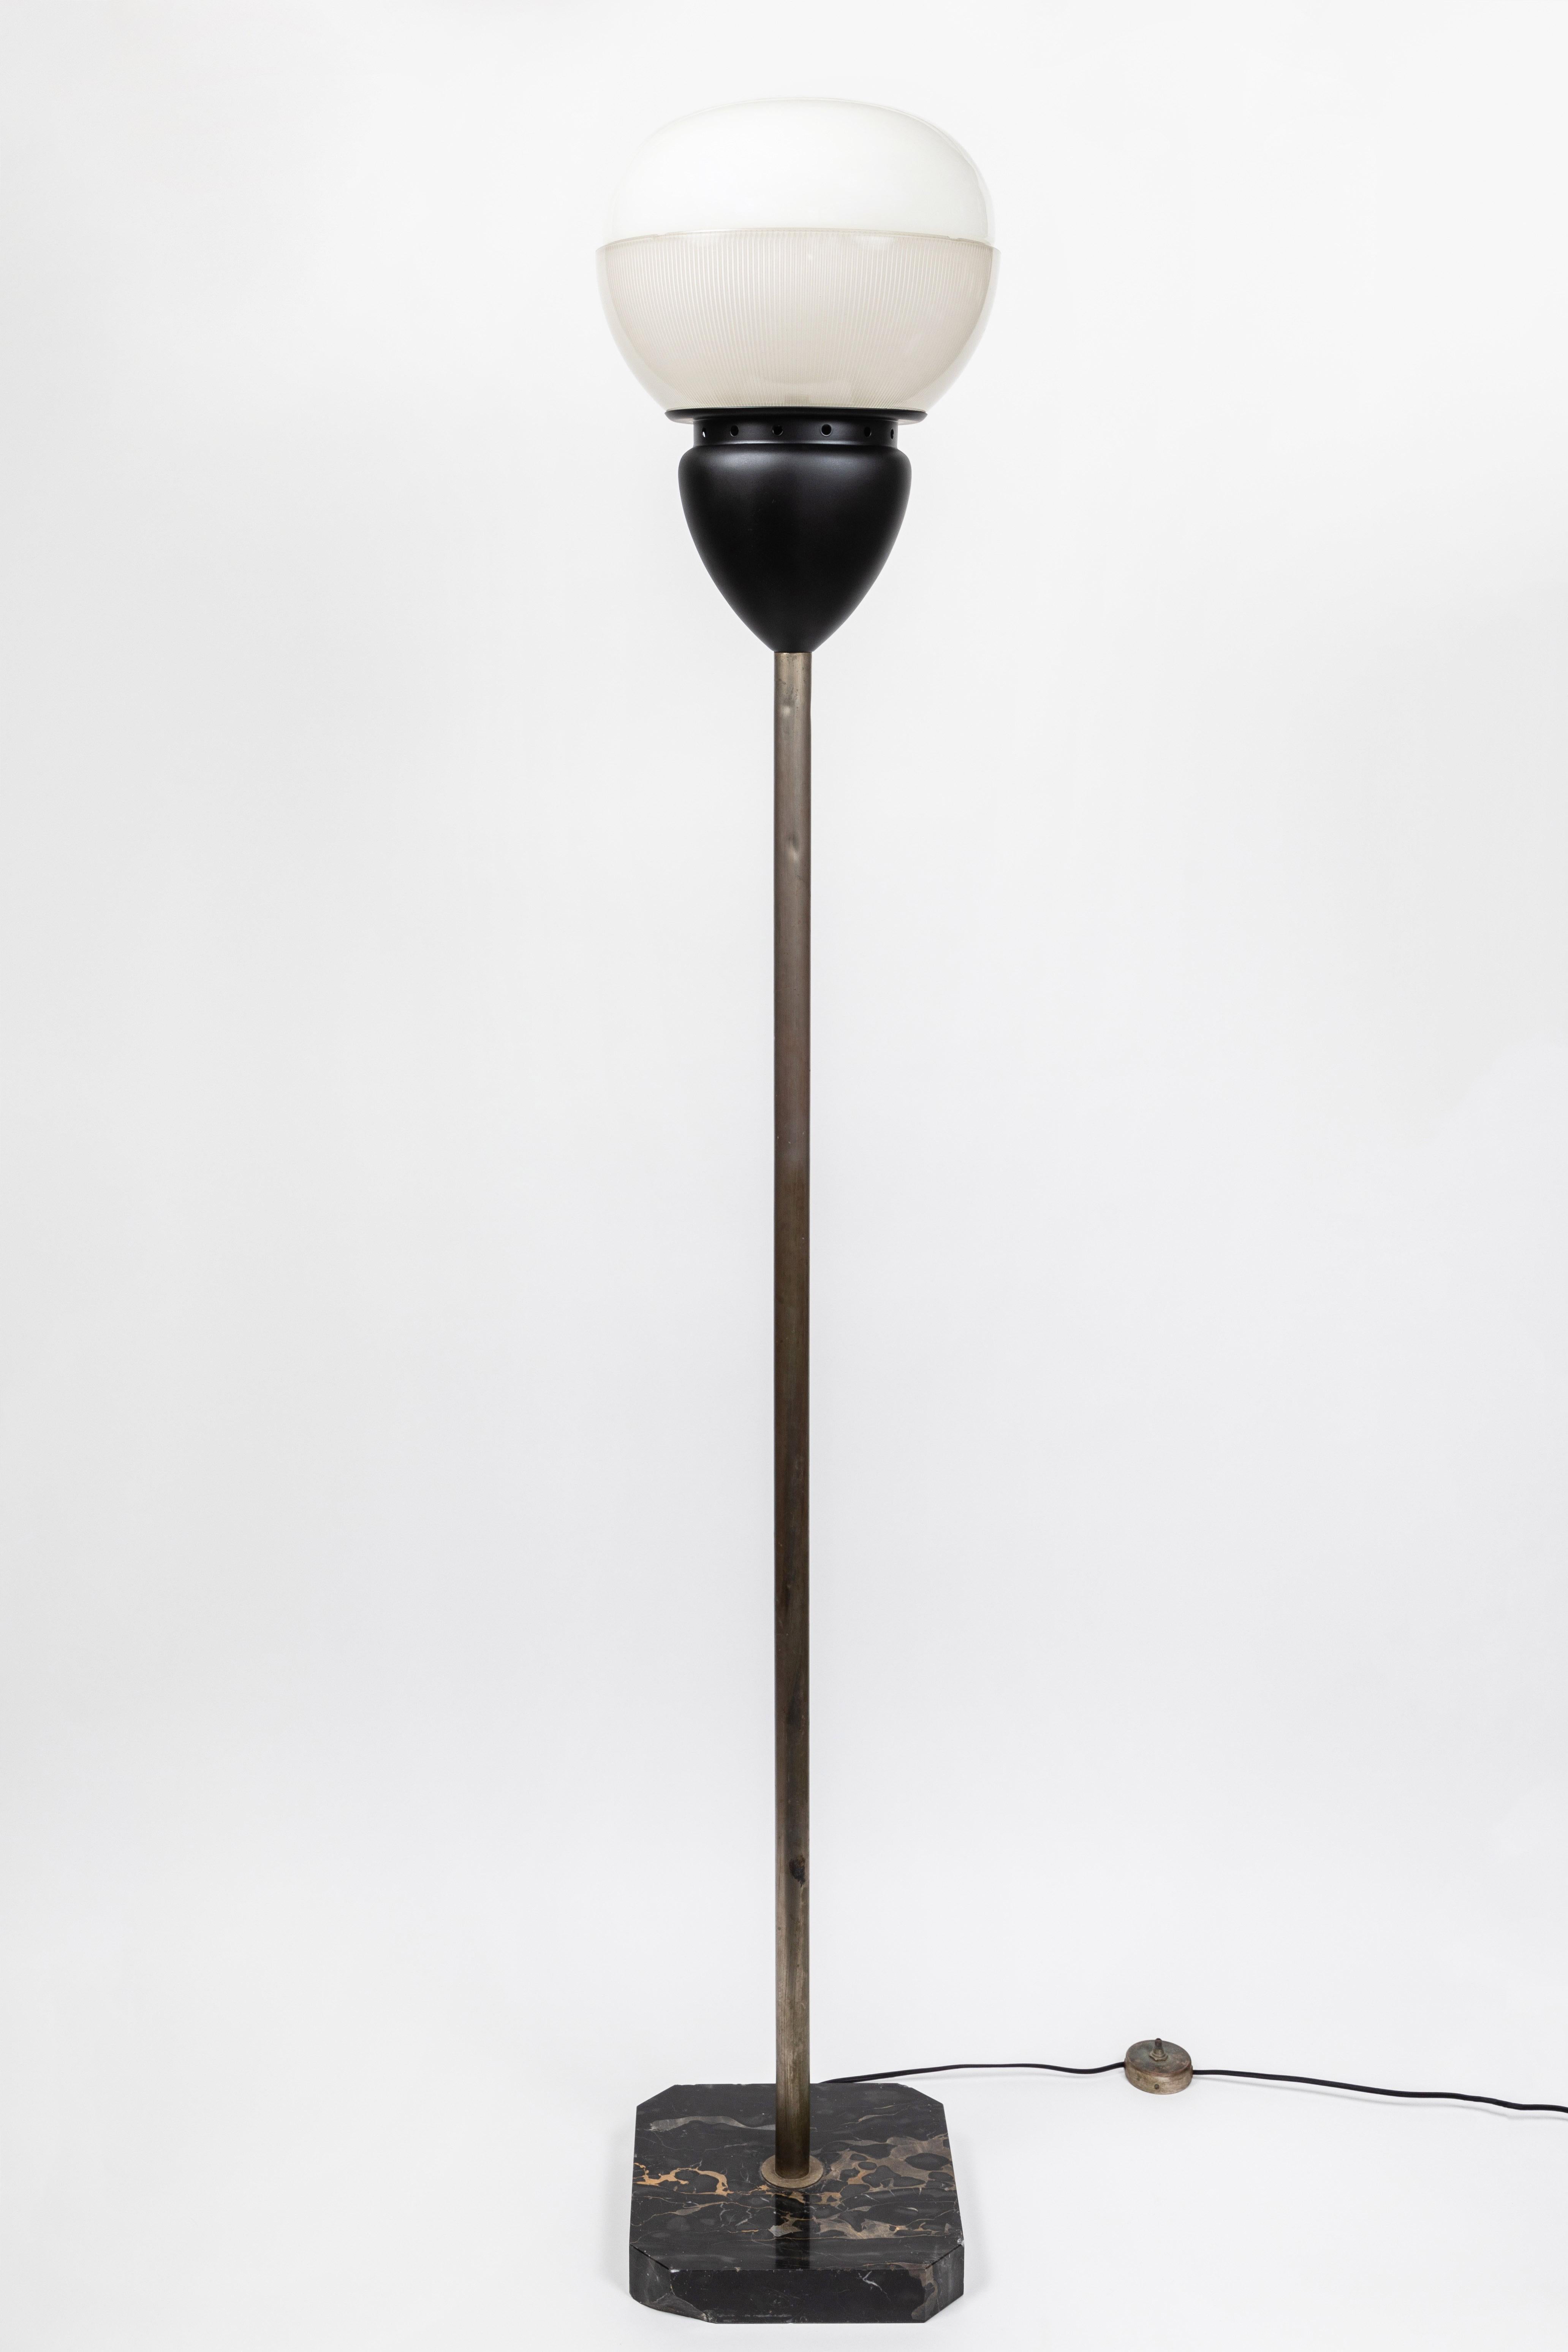 Monumental 1960 Sergio Mazza floor lamp for Artemide. Executed in black marble, nickel-plated brass, painted aluminum, pressed glass, and opaline glass. A quintessentially Italian and definitive early period Artemide design by the iconic Mazza.